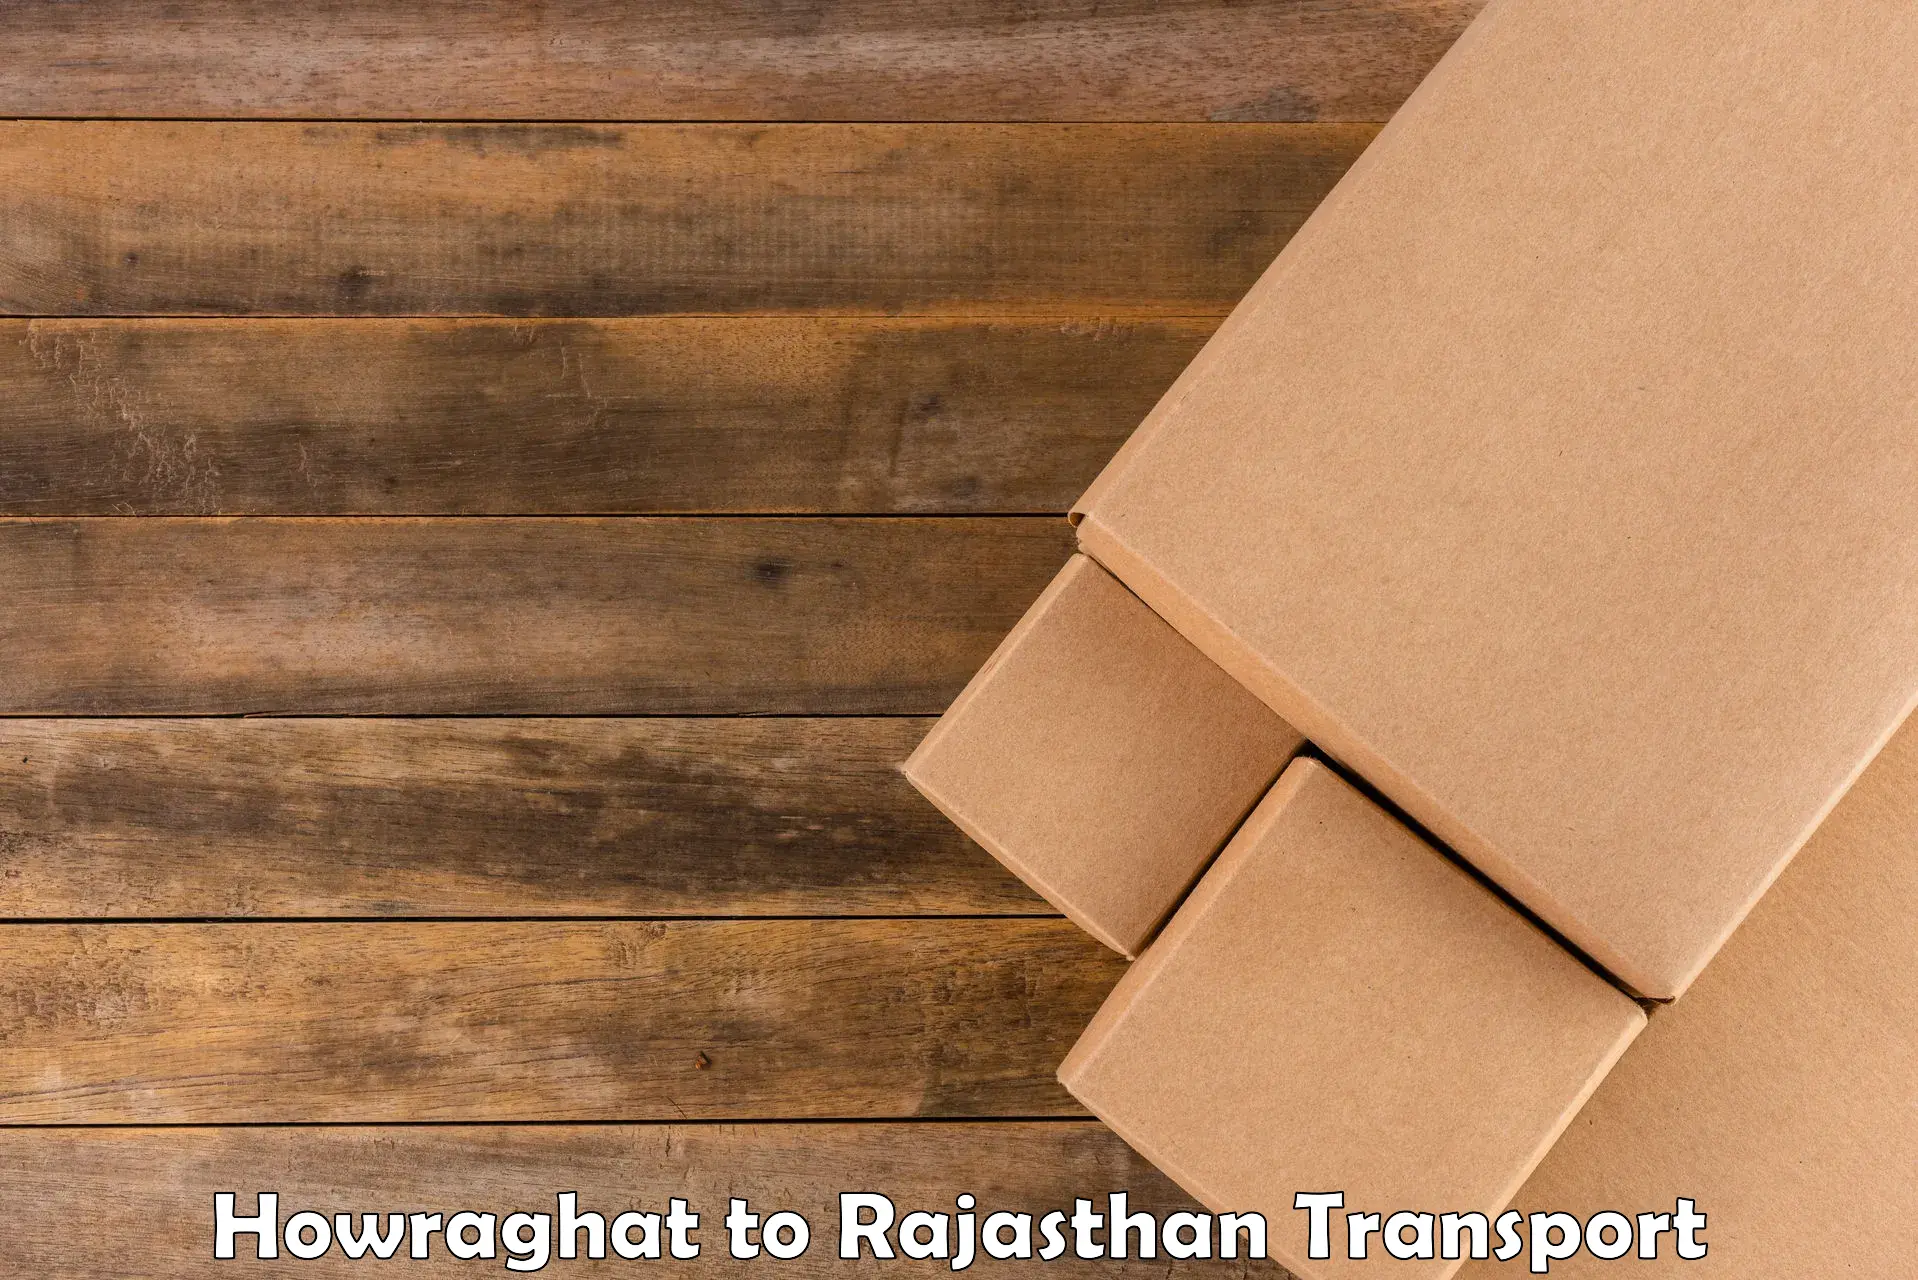 Part load transport service in India Howraghat to Rawatsar